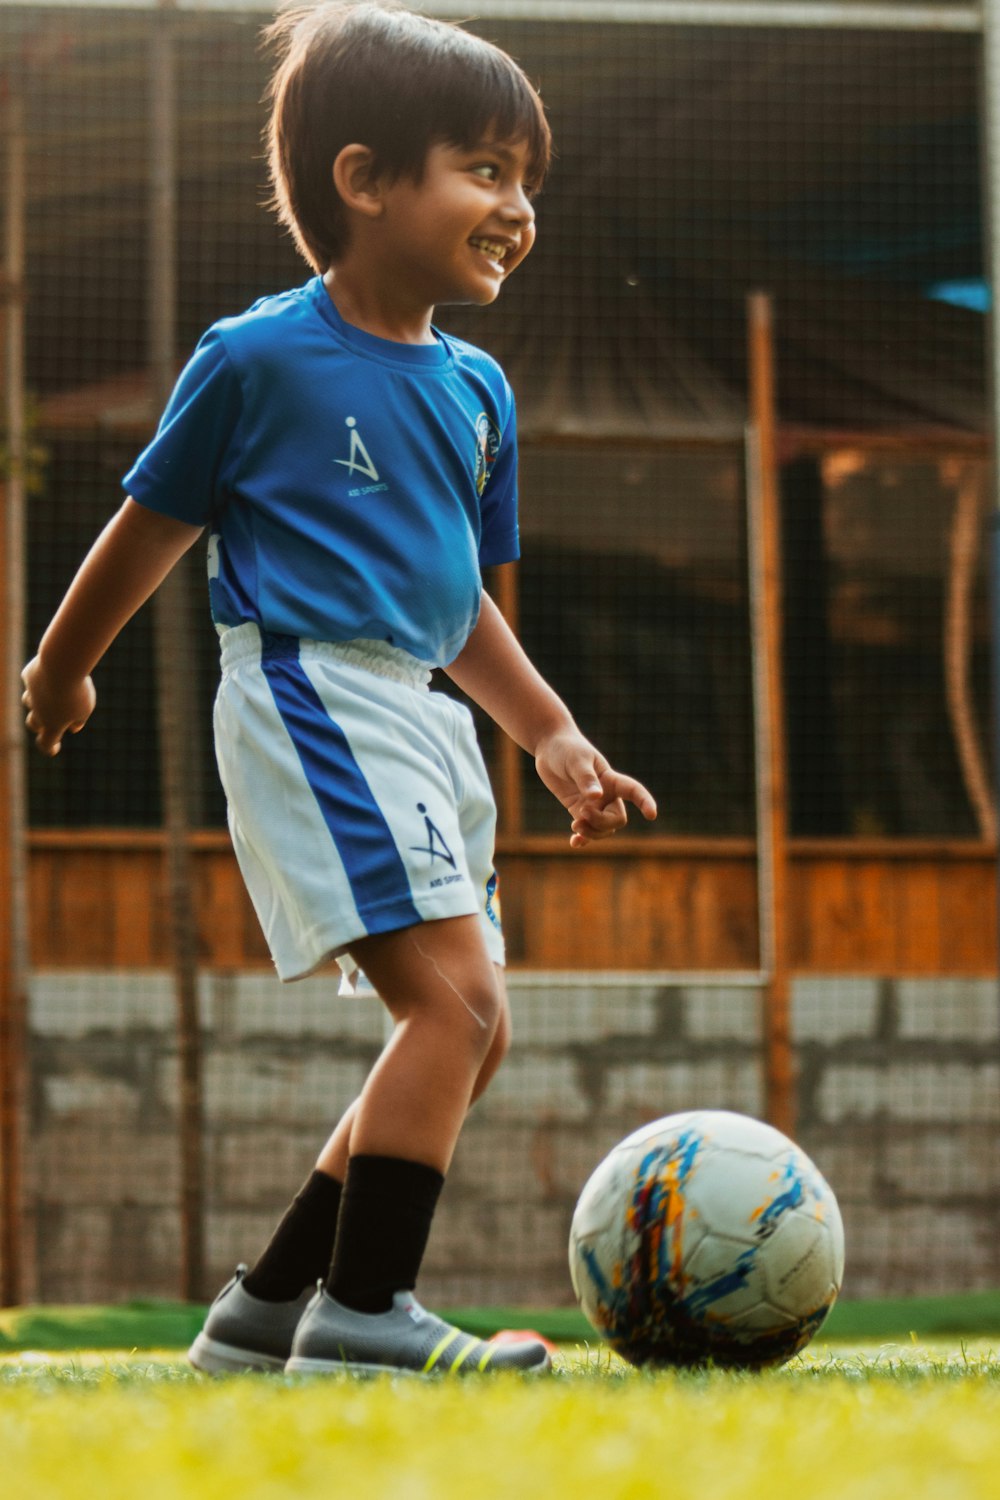 boy in blue and white soccer jersey kicking soccer ball